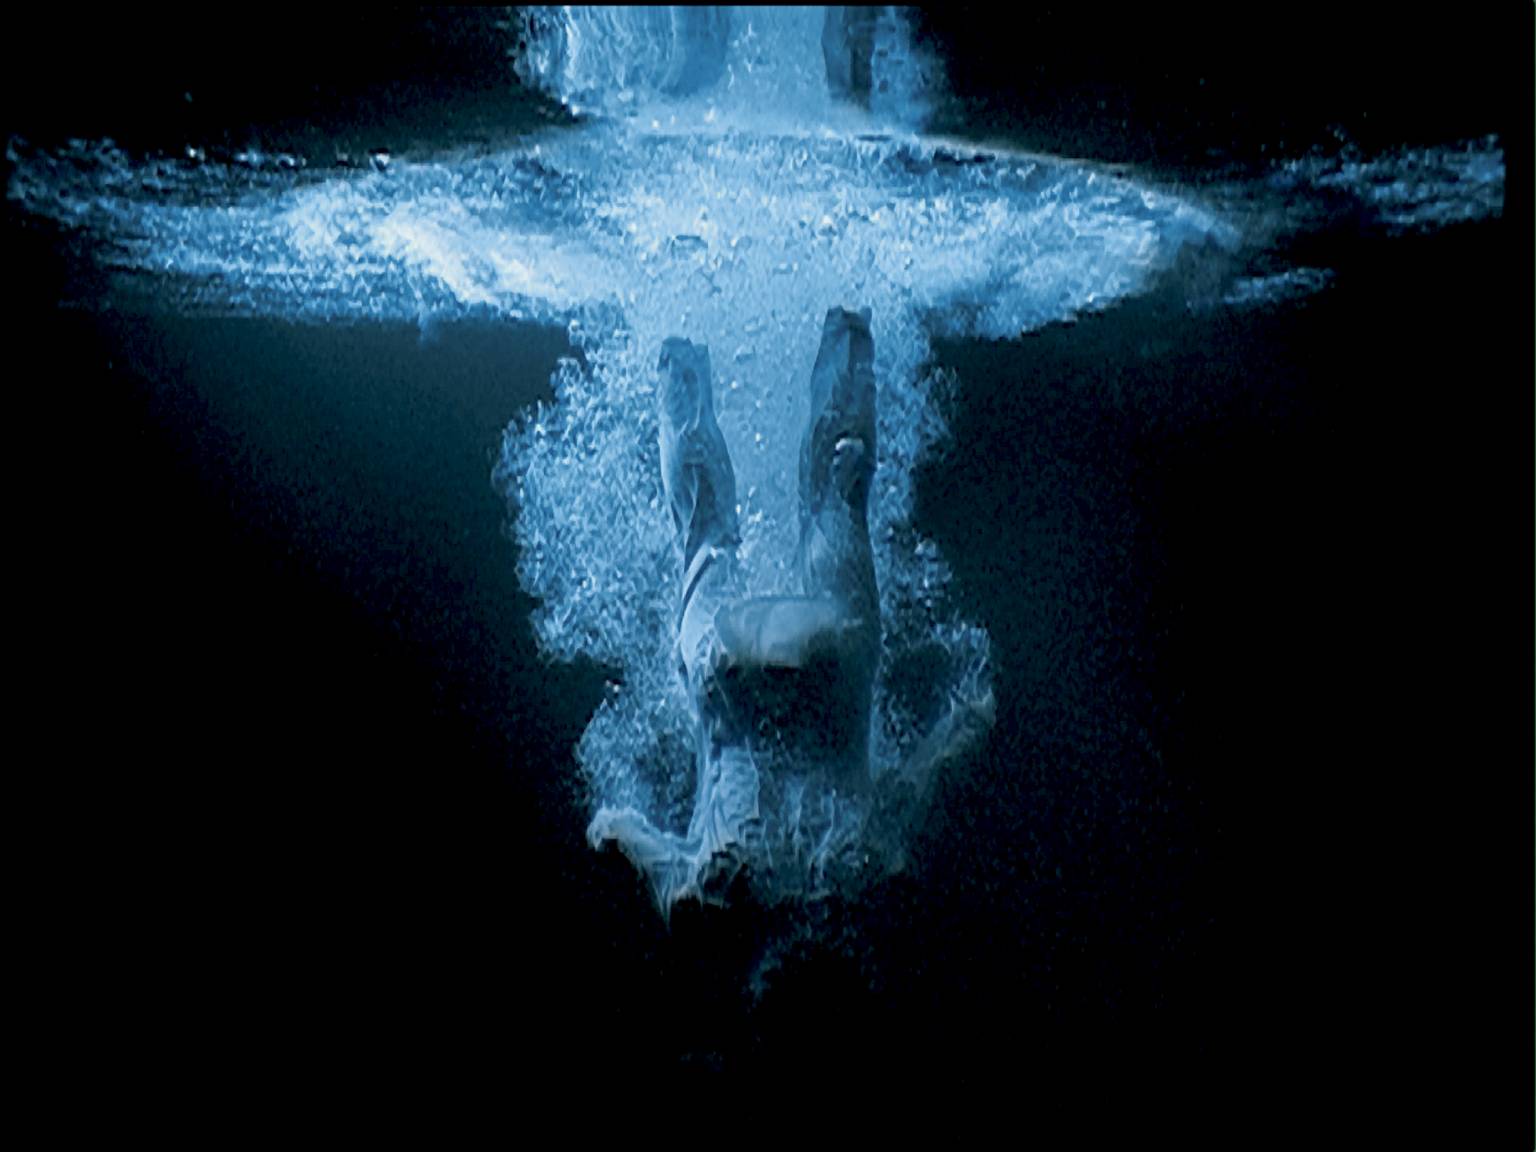 Five Angels for the Millennium 2001 by Bill Viola born 1951